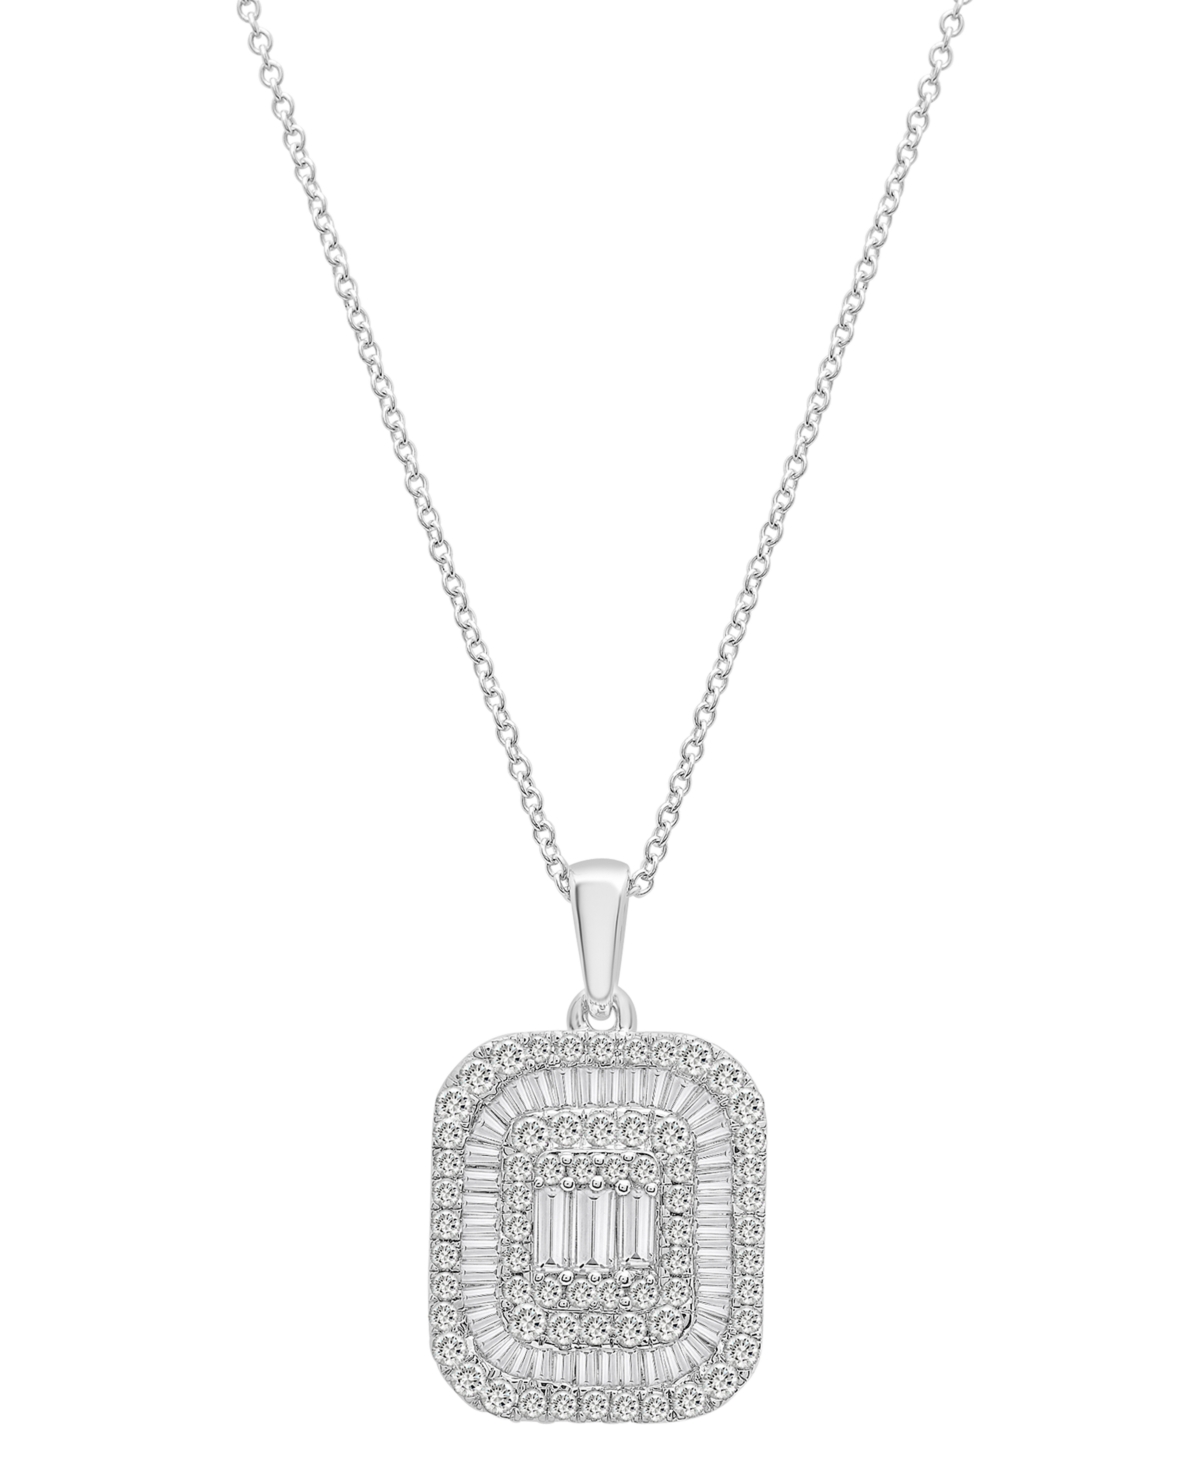 Diamond Round & Baguette Square Halo Cluster Pendant Necklace (1 ct. t.w.) in 14k White Gold, 16" + 2" extender, Created for Macy's -